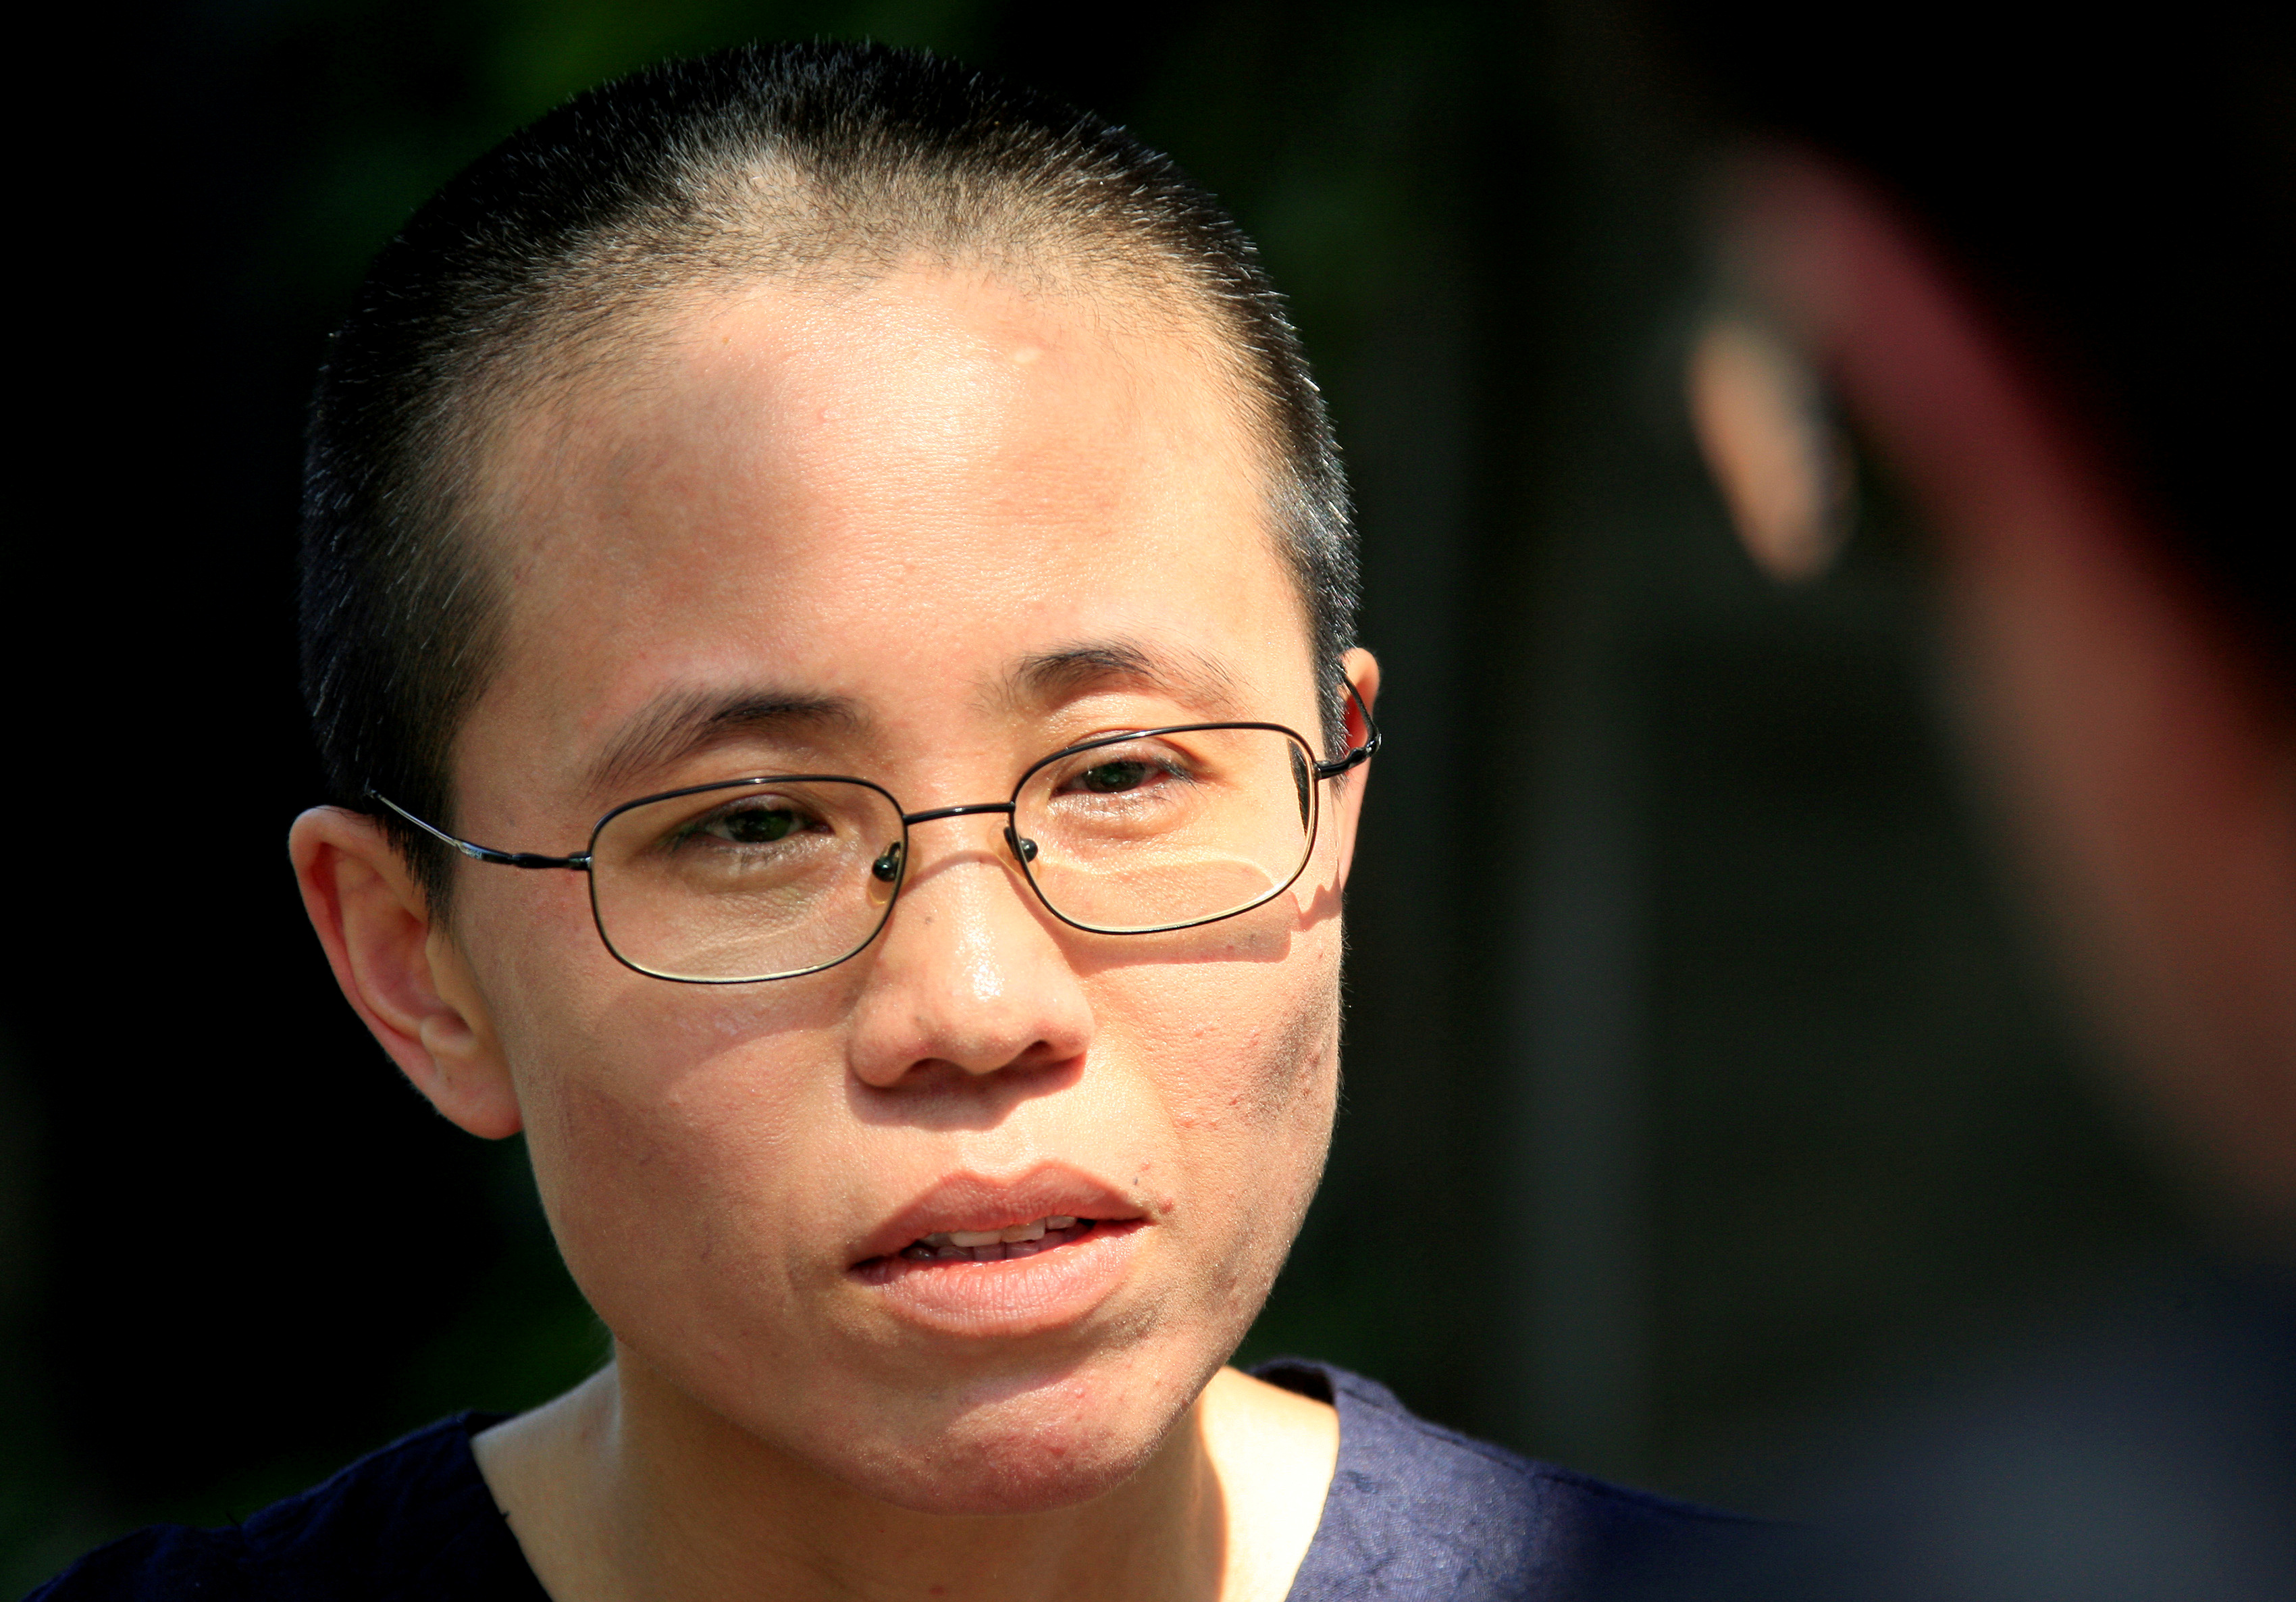 Liu Xia, wife of veteran Chinese pro-democracy activist Liu Xiaobo, listens to a question during an interview in Beijing June 24, 2009. (David Gray—Reuters)